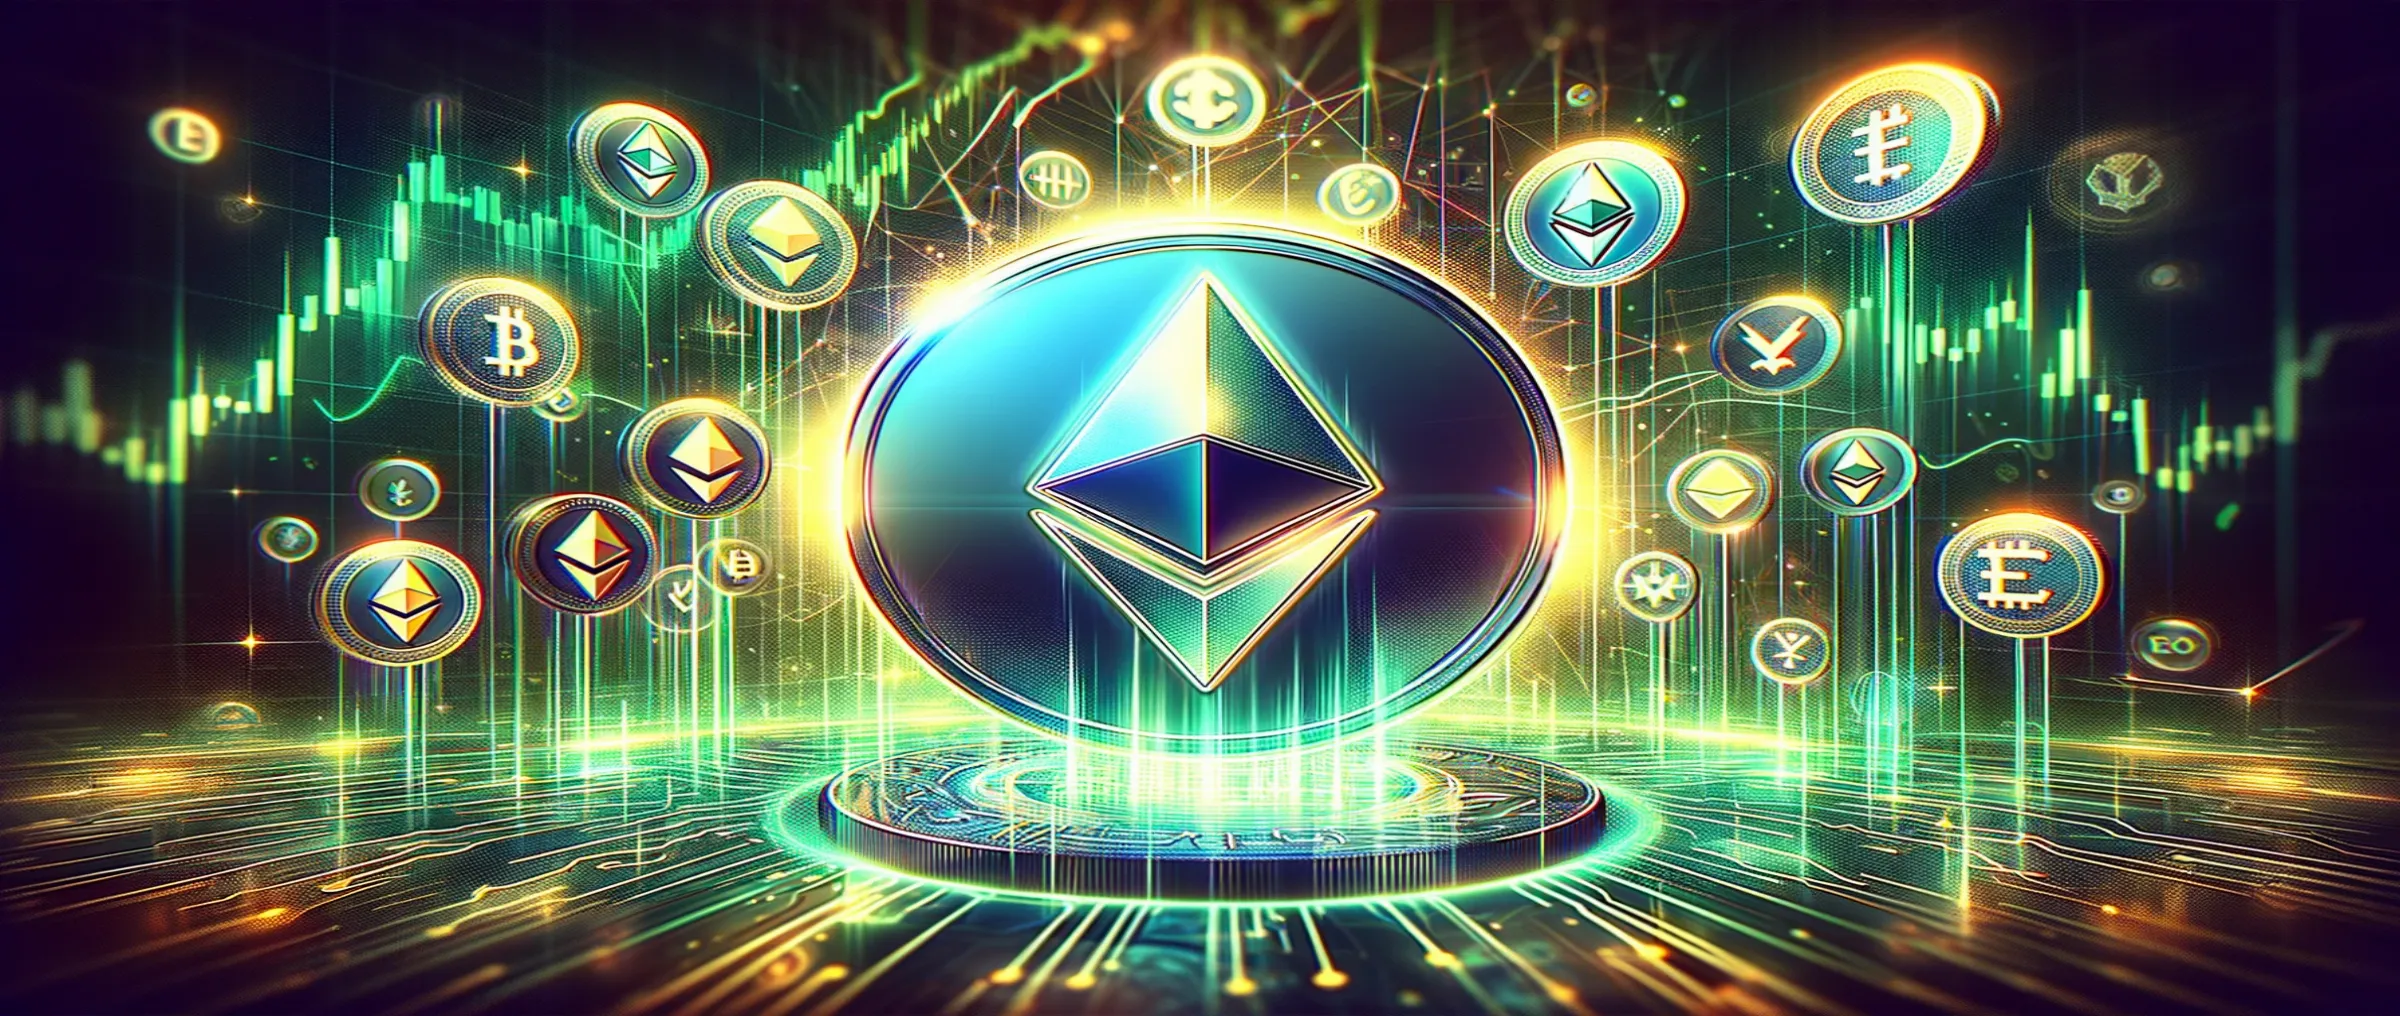 Ethereum Classic has become the leader in the ranking of the most successful altcoins